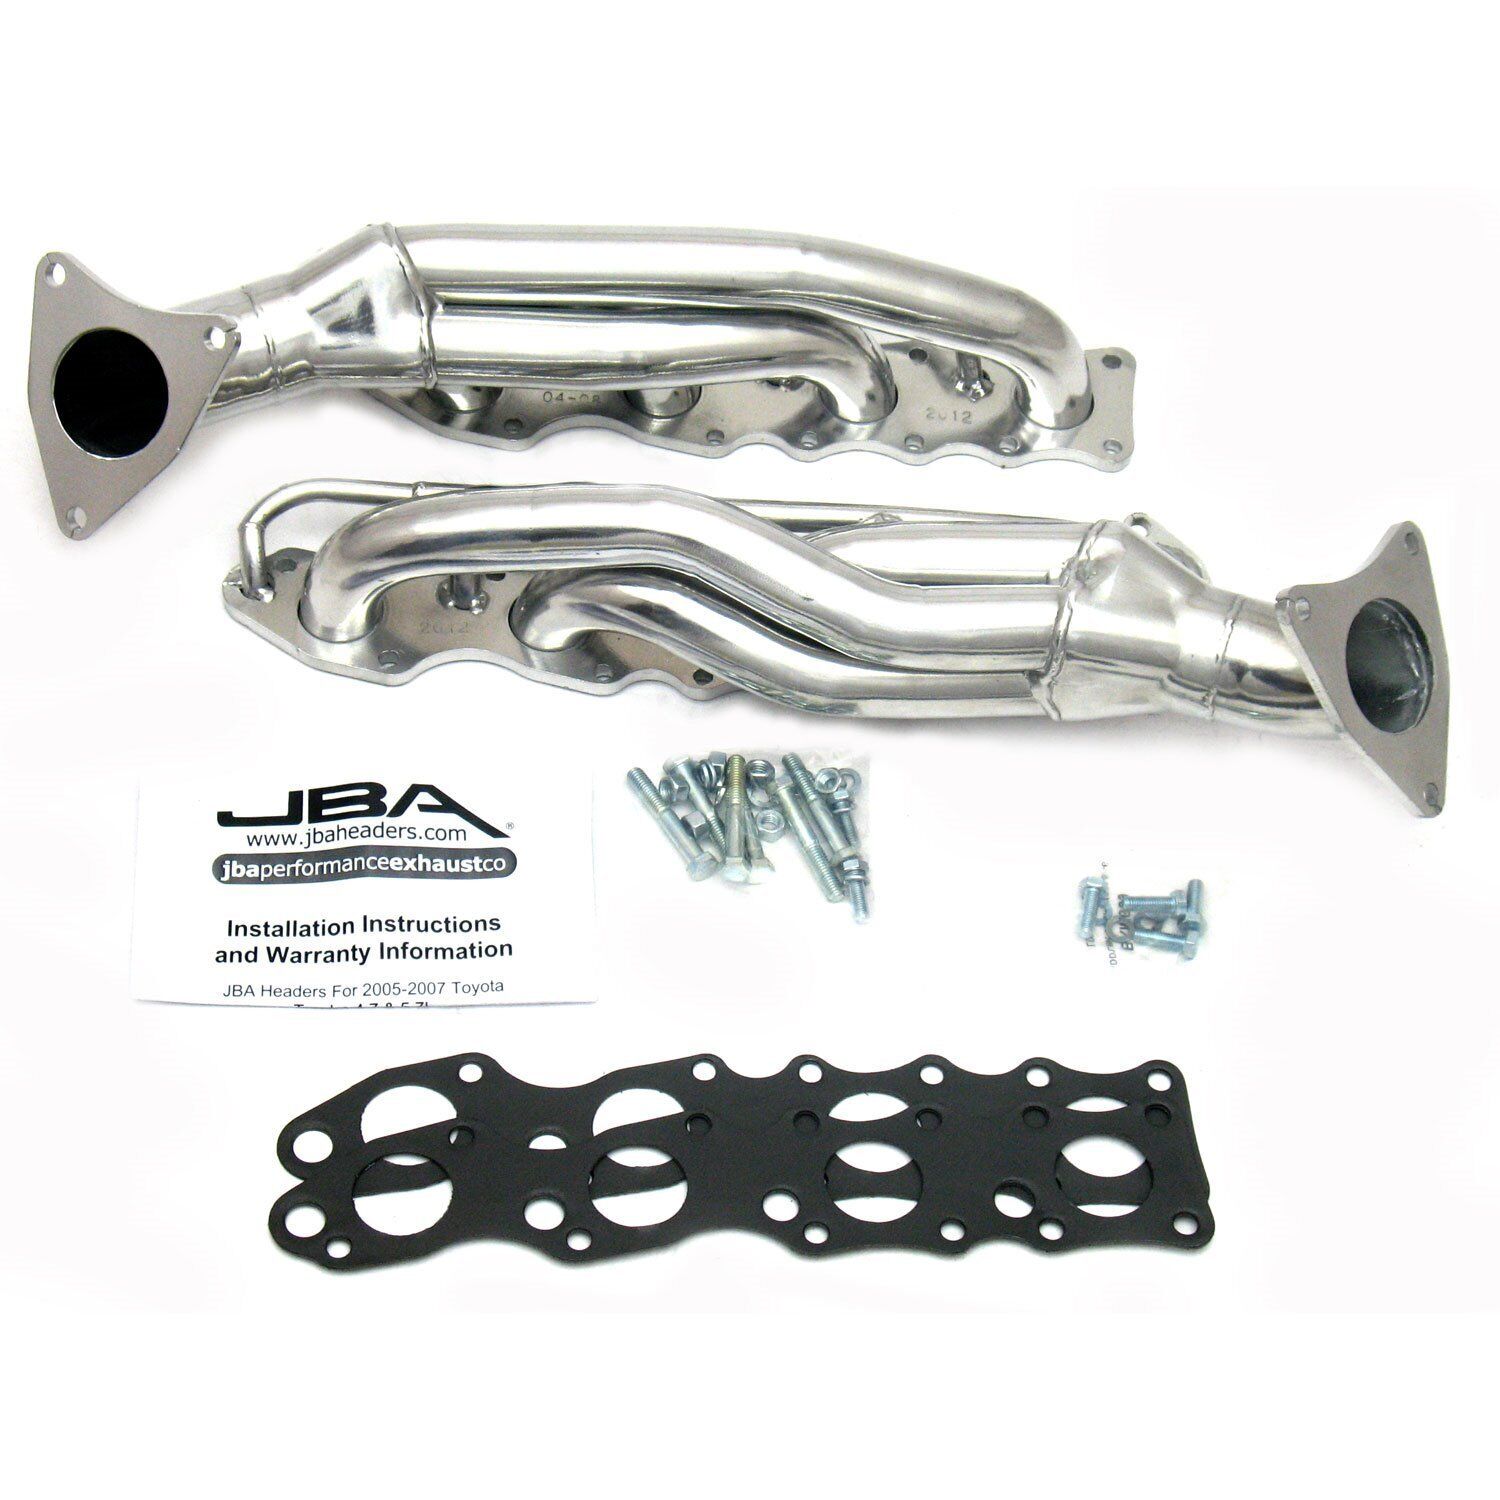 JBA 2012SJS Shorty Headers 2007-2014 for Toyota Tundra and Sequoia 5.7L 1-5/8 Pr